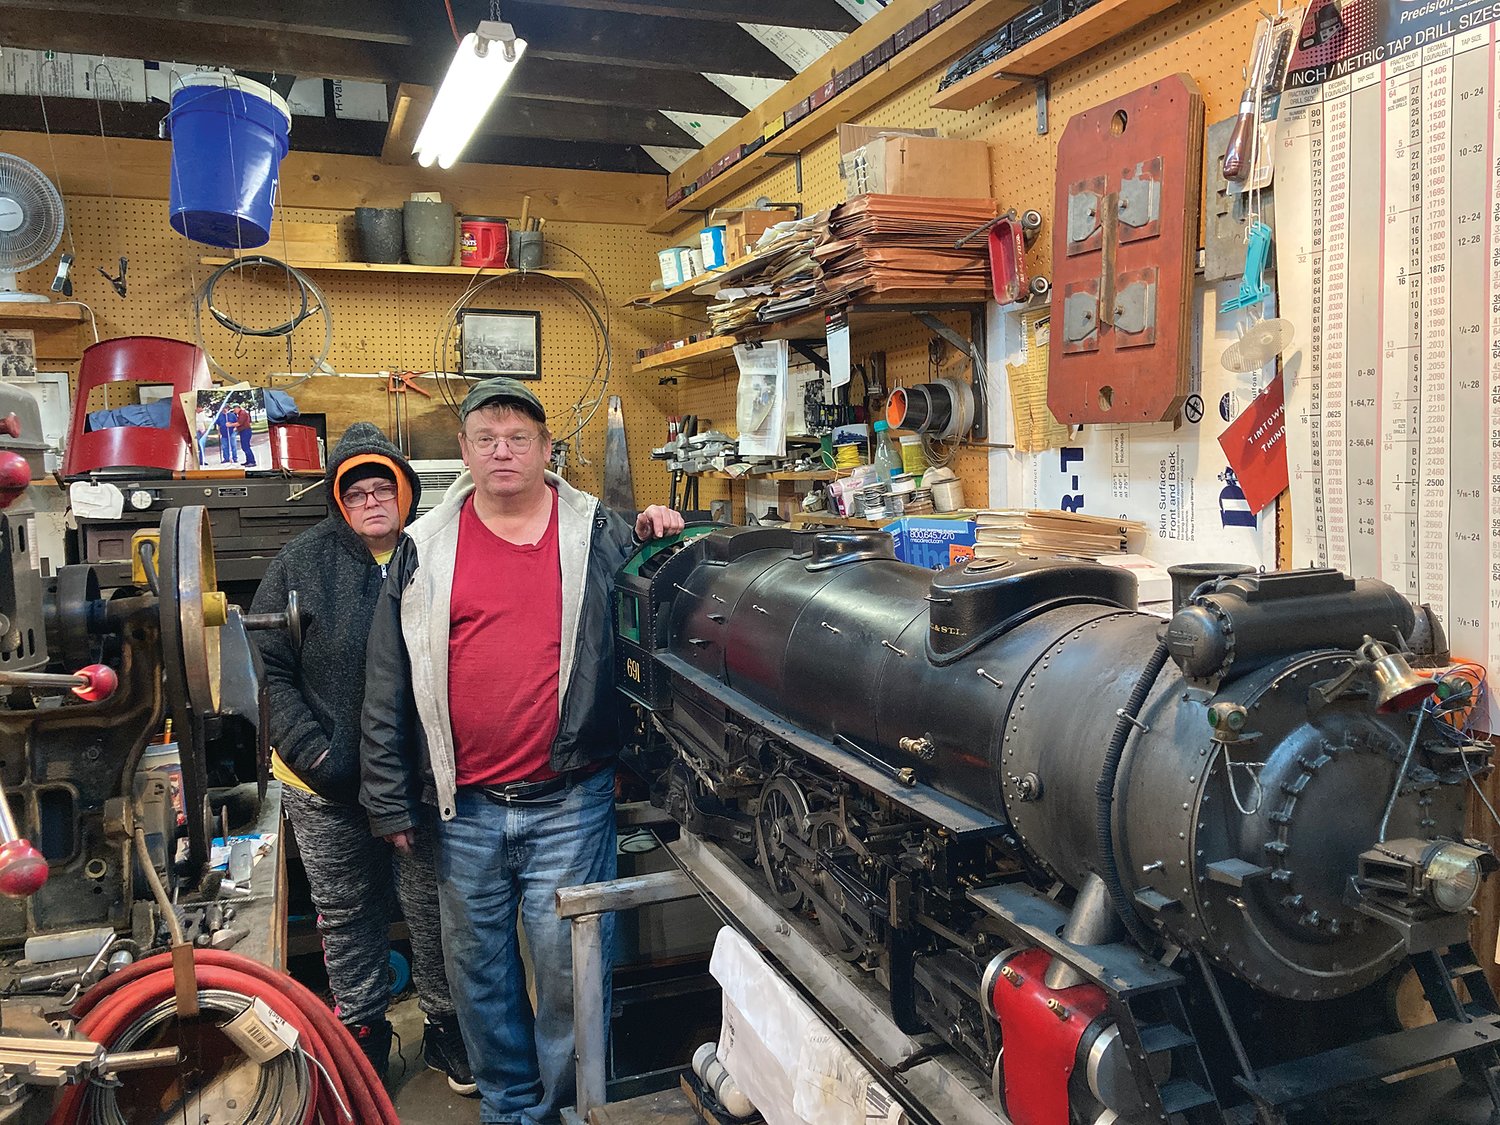 Tim Sering and his wife, Deb, stand next to a model steam engine in his workshop at their Darlington home. The engine is a replica of a locomotive used on the Nickel Plate Railroad.